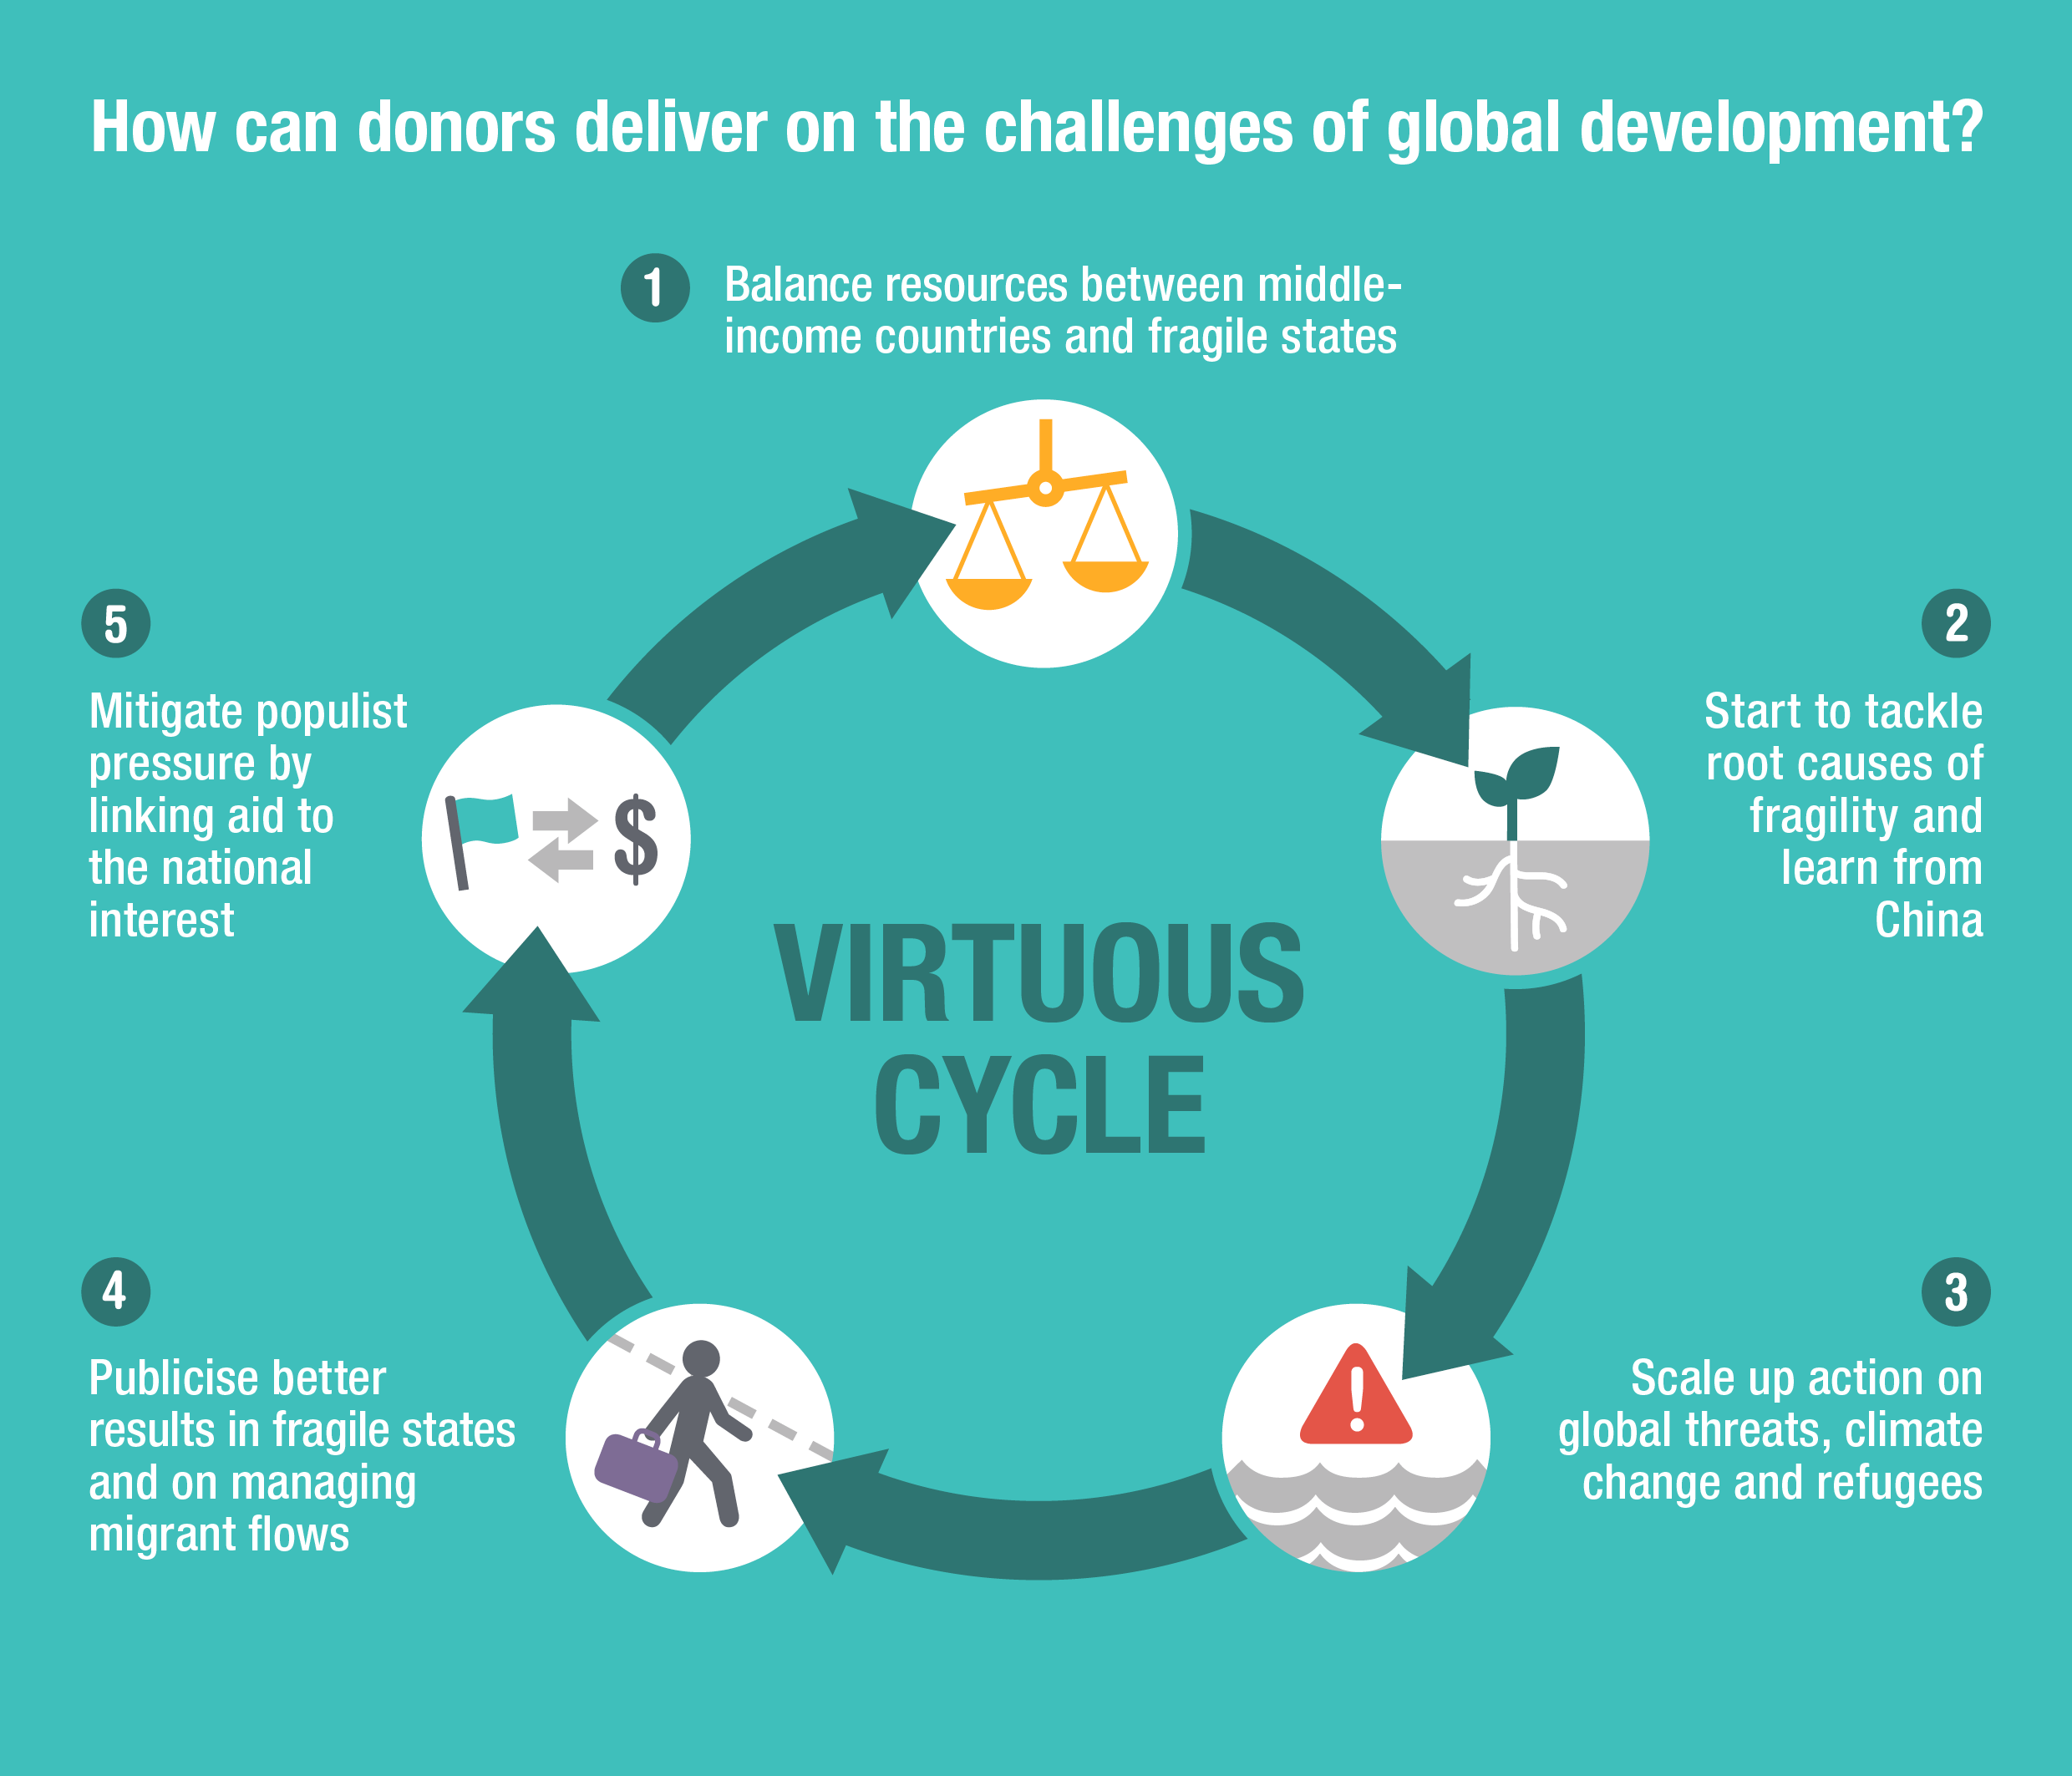 How can donors deliver on the challenges of global development?